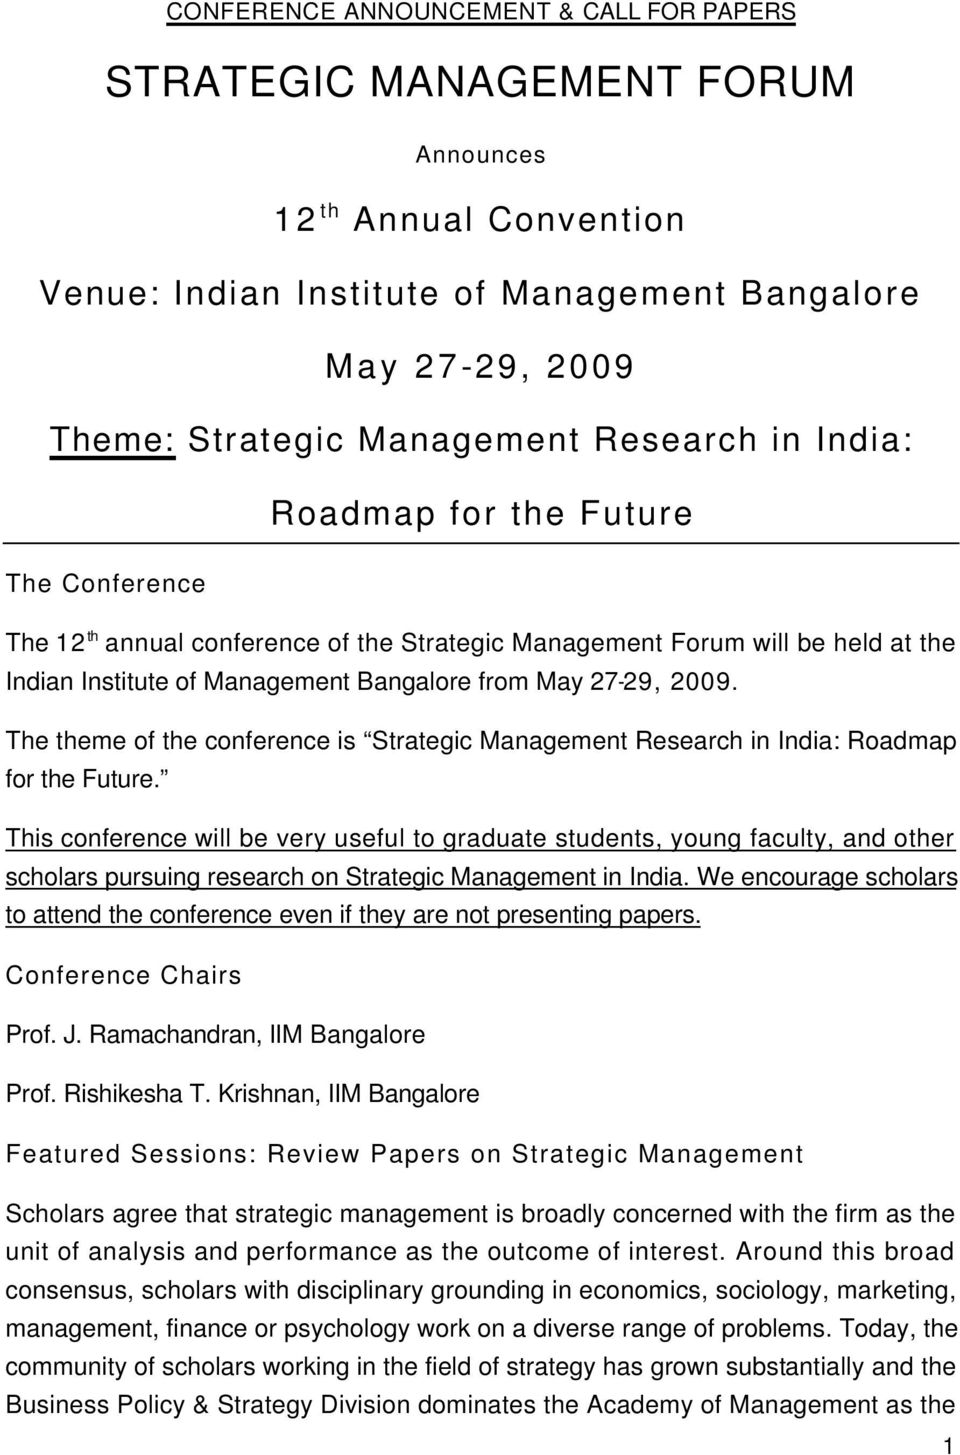 2009. The theme of the conference is Strategic Management Research in India: Roadmap for the Future.